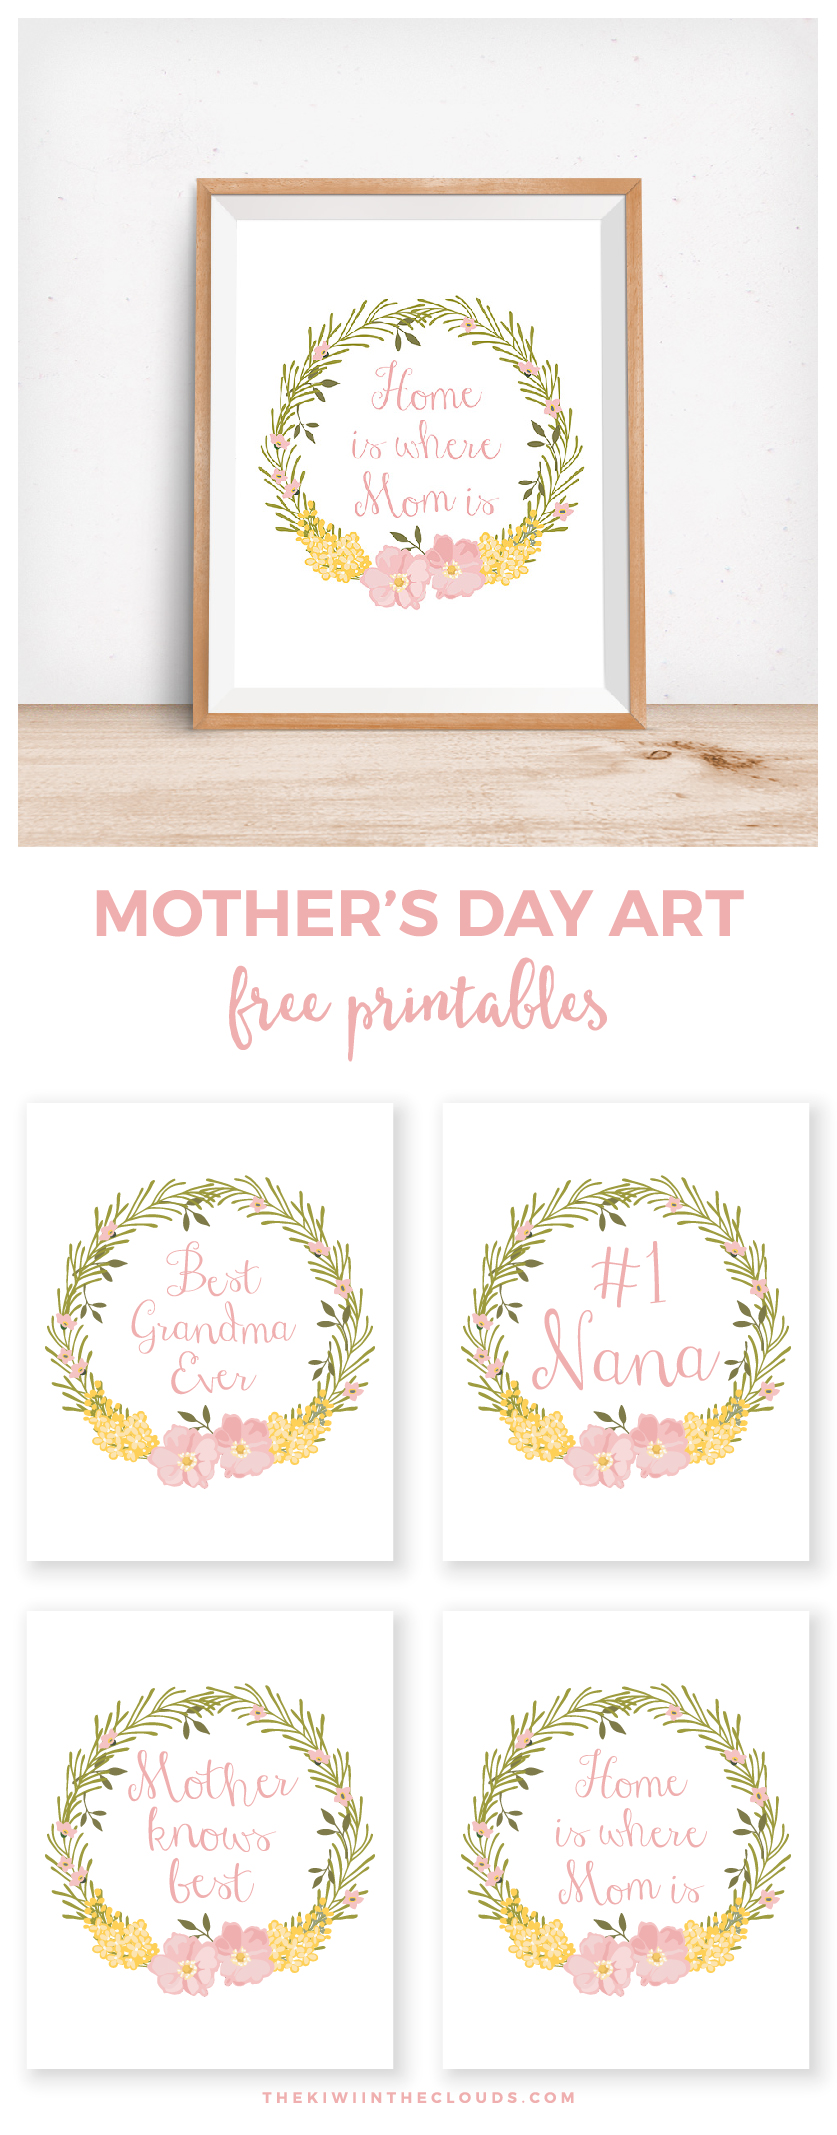 Mother's Day Free Printables | Click through to download 4 FREE 8x10 mother's day prints for mom, grandma and nana! 